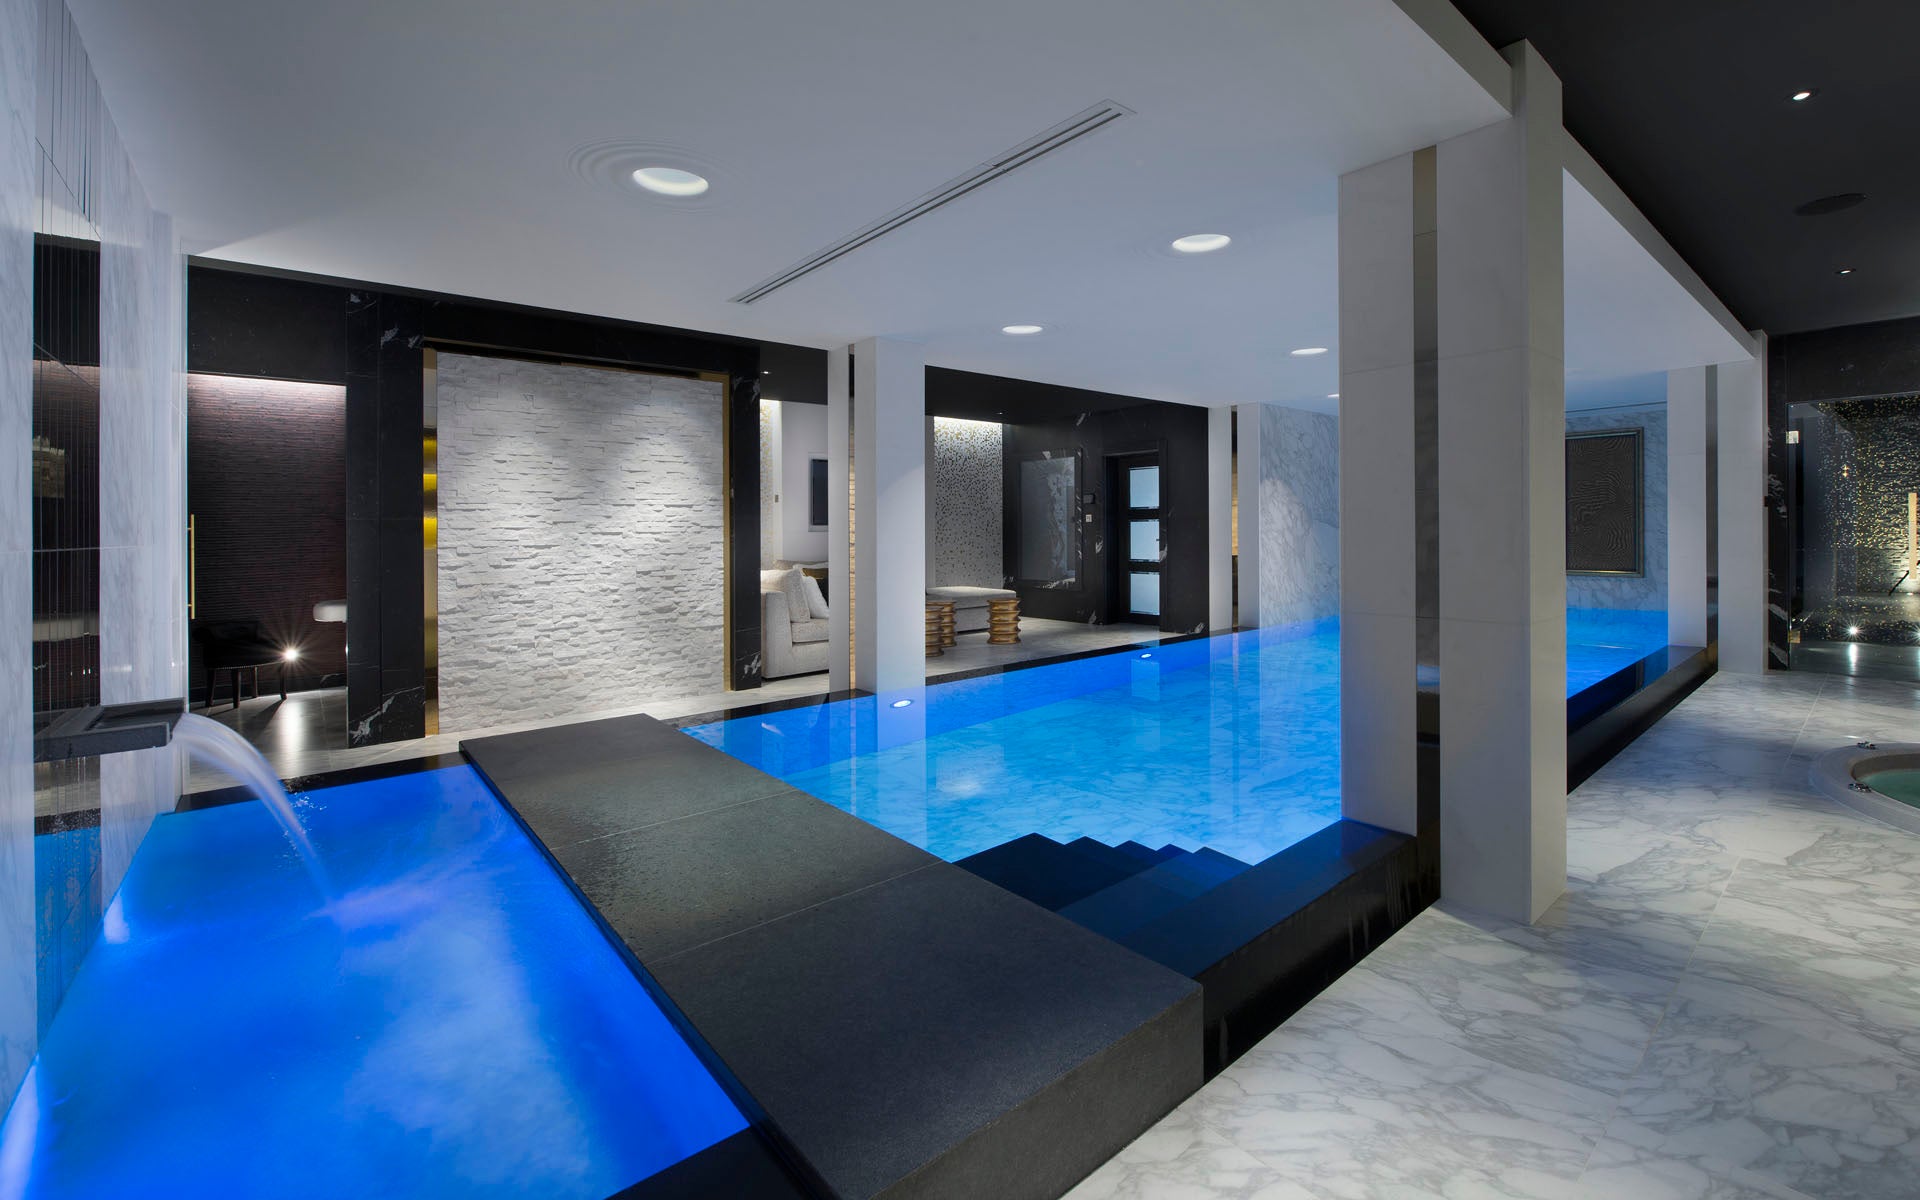 The indoor swimming pool at Chalet Le Coquelicot (The Firefly Collection )